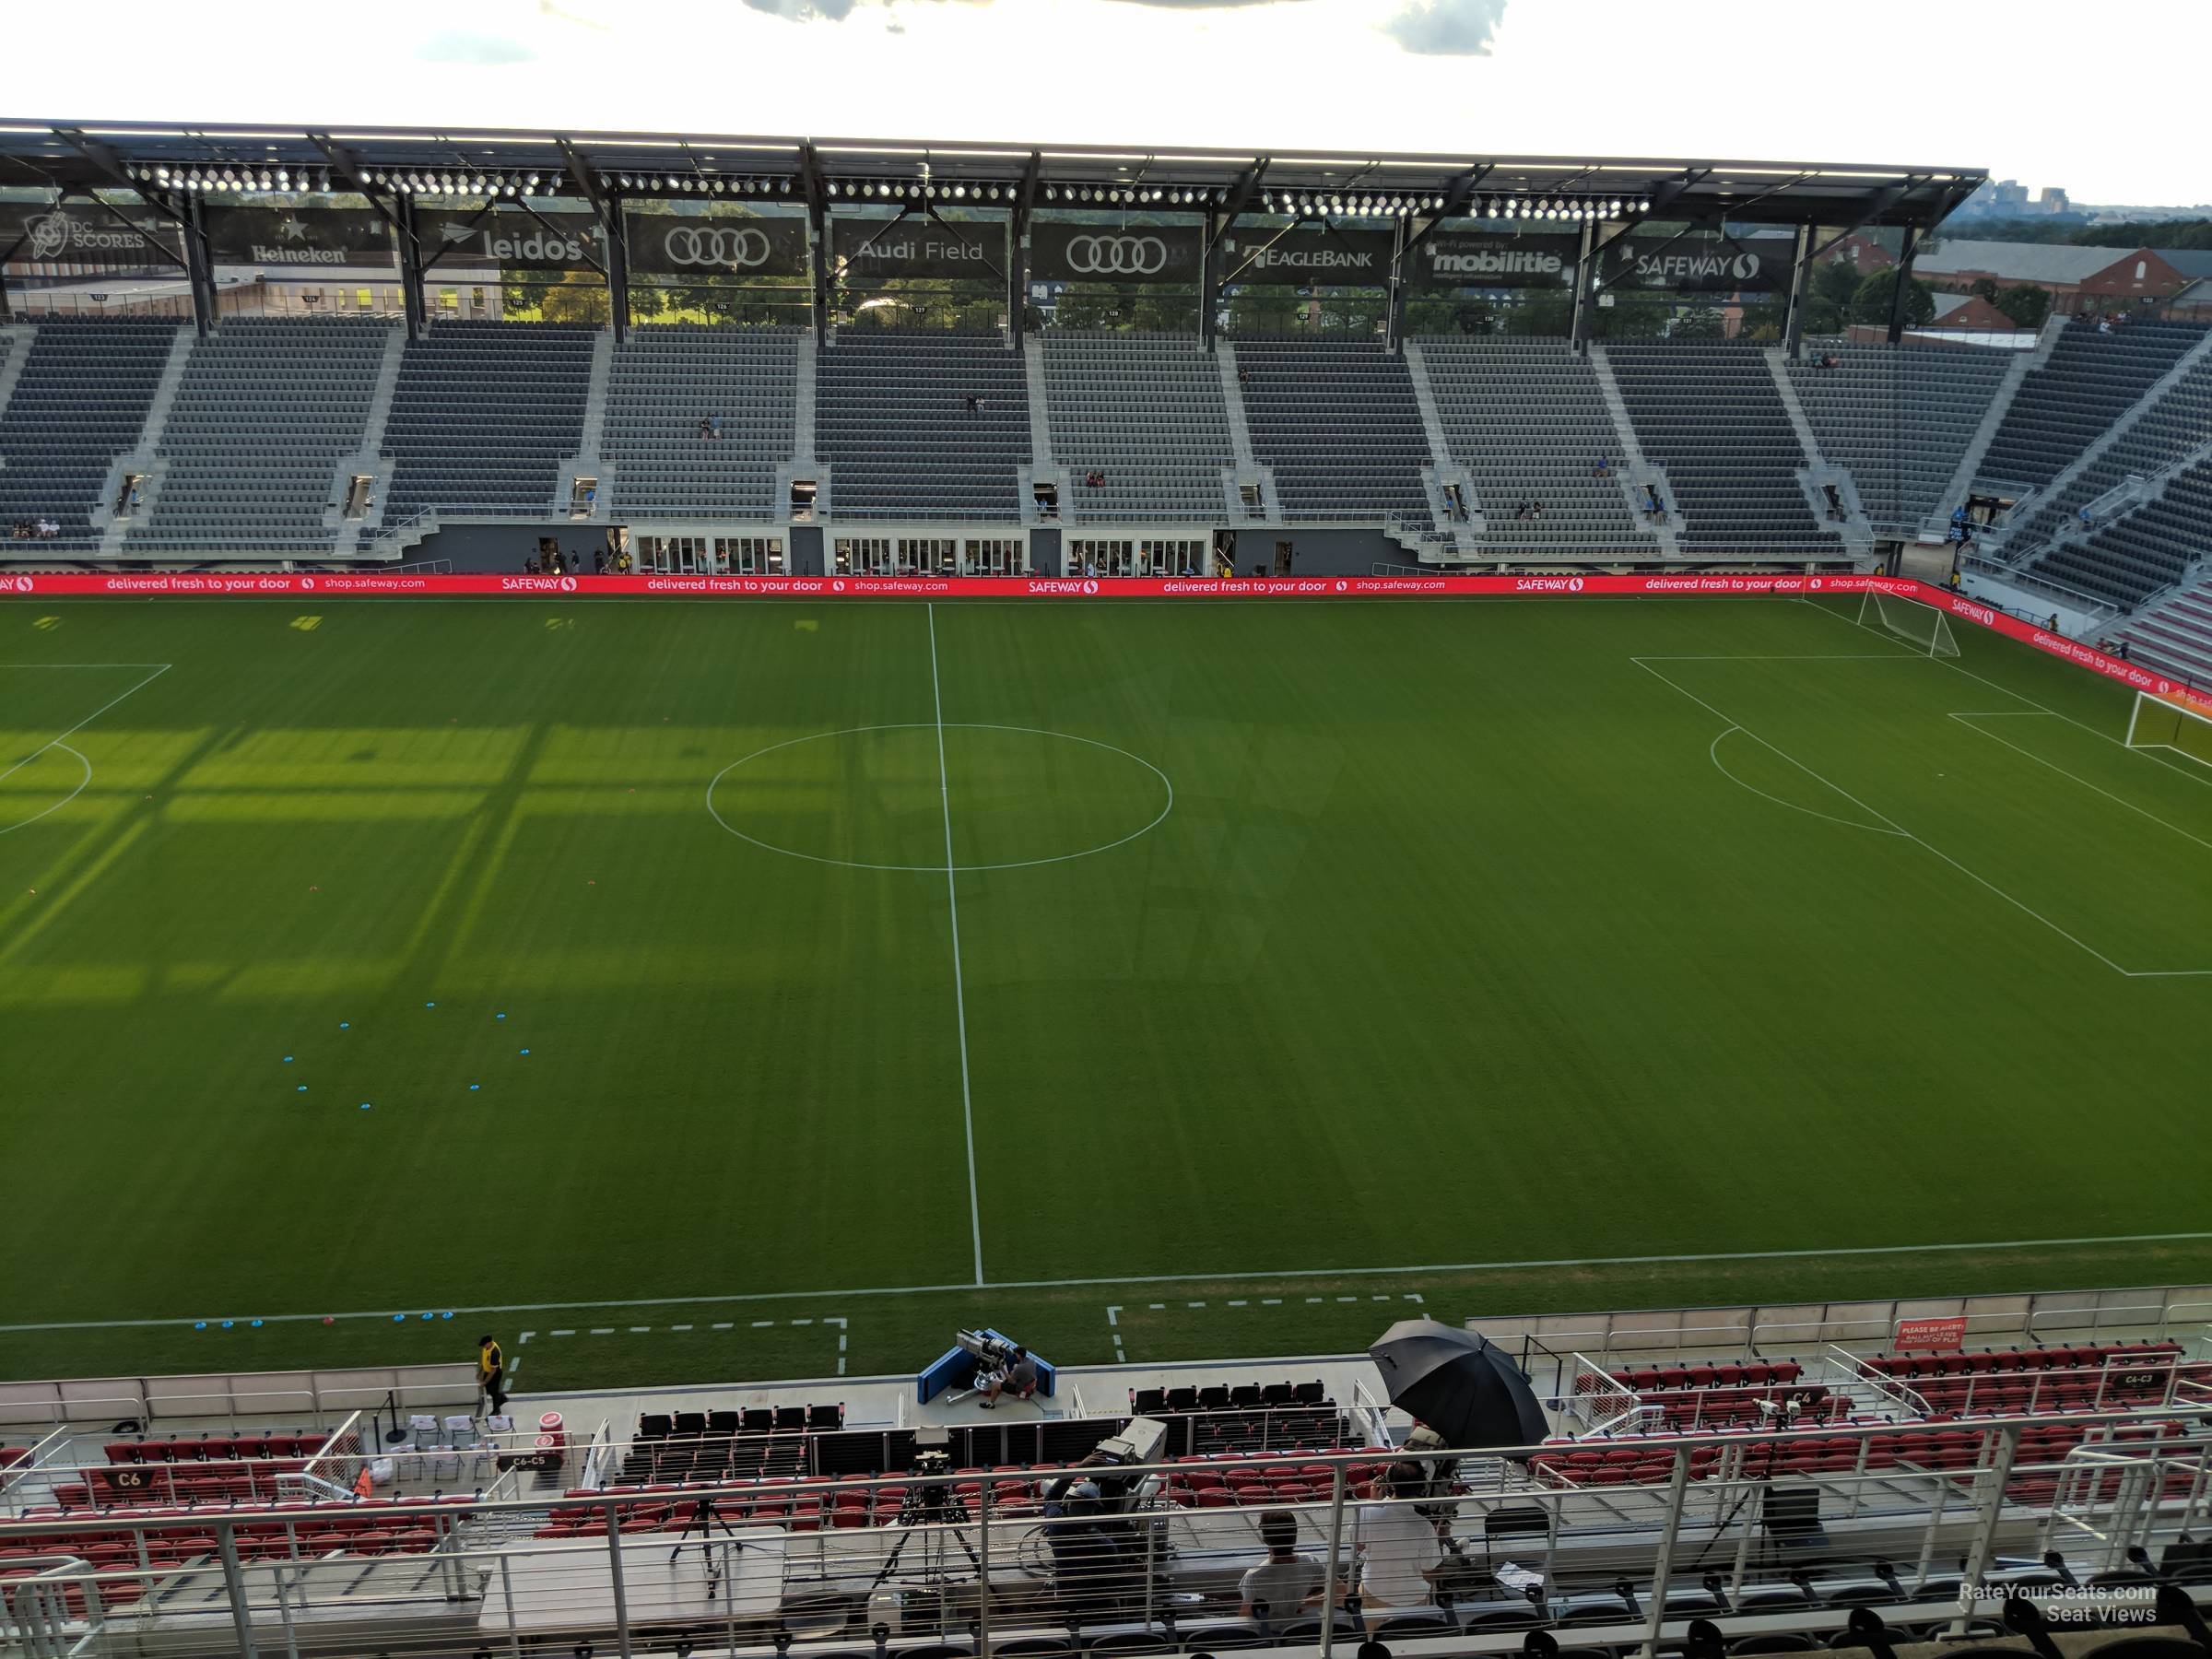 section 206, row 6 seat view  - audi field